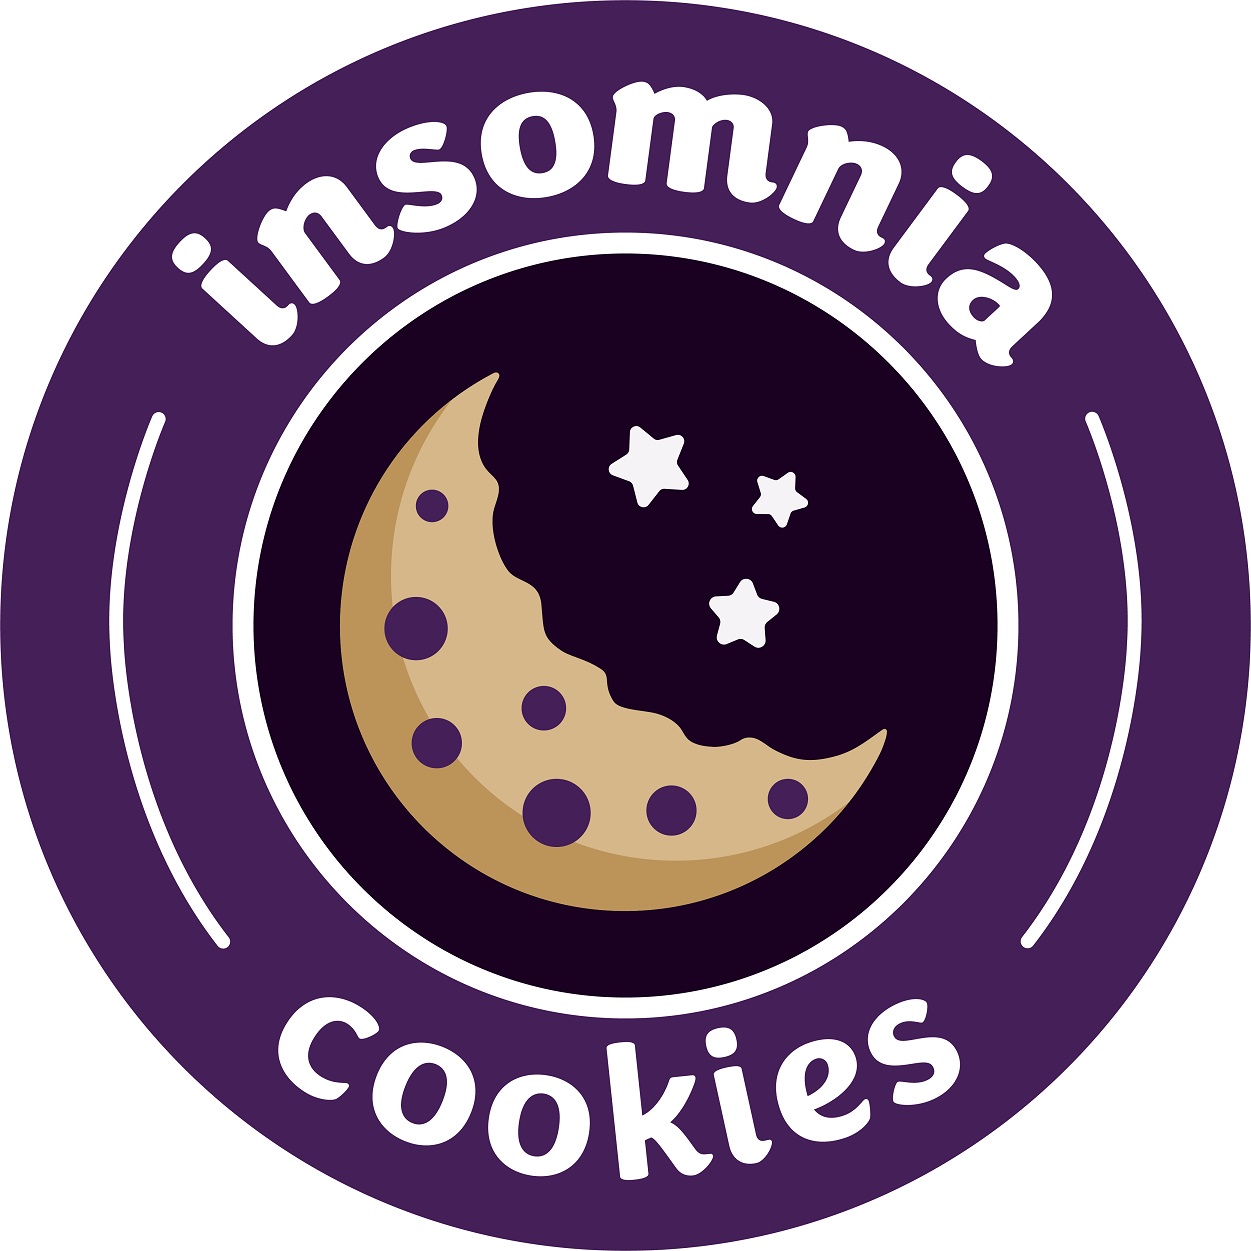 Insomnia Cookies Invites College Students to Its First Ever Global PJ Party